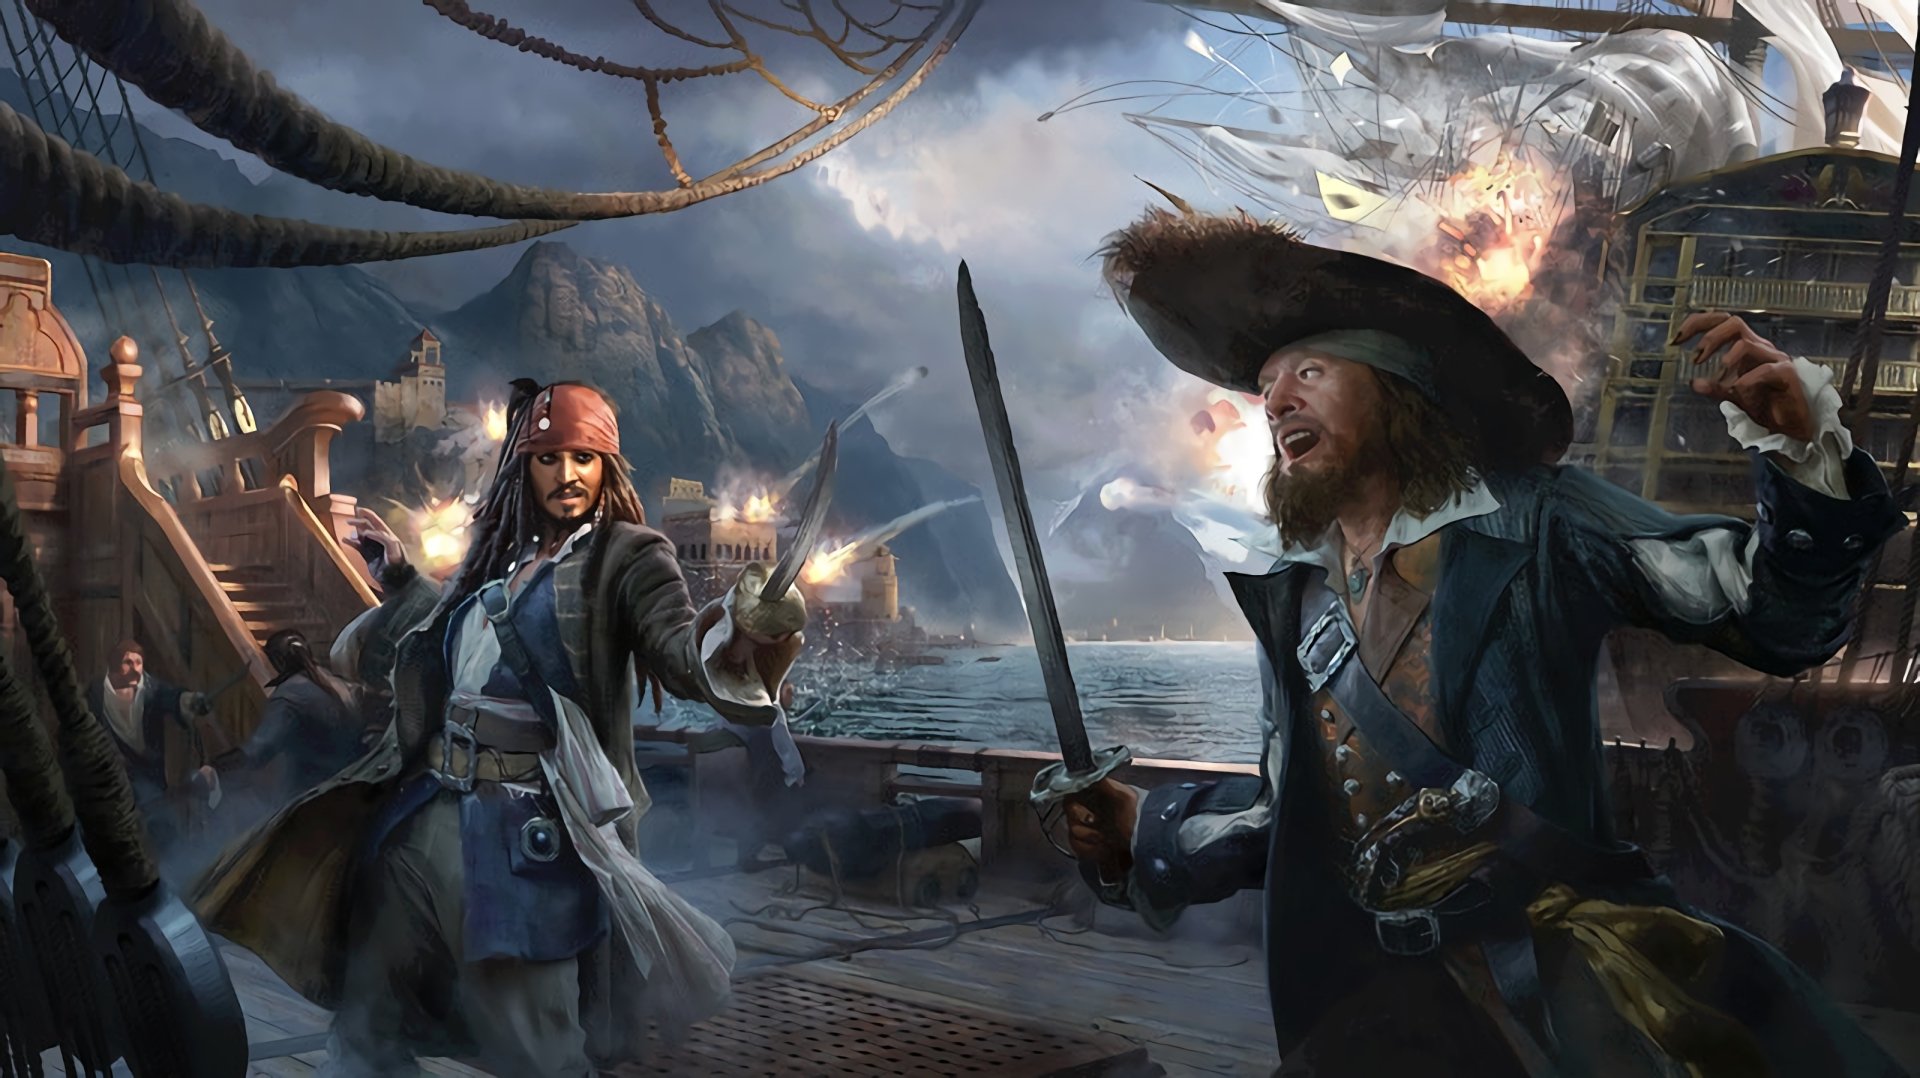 pirates of the caribbean tow game